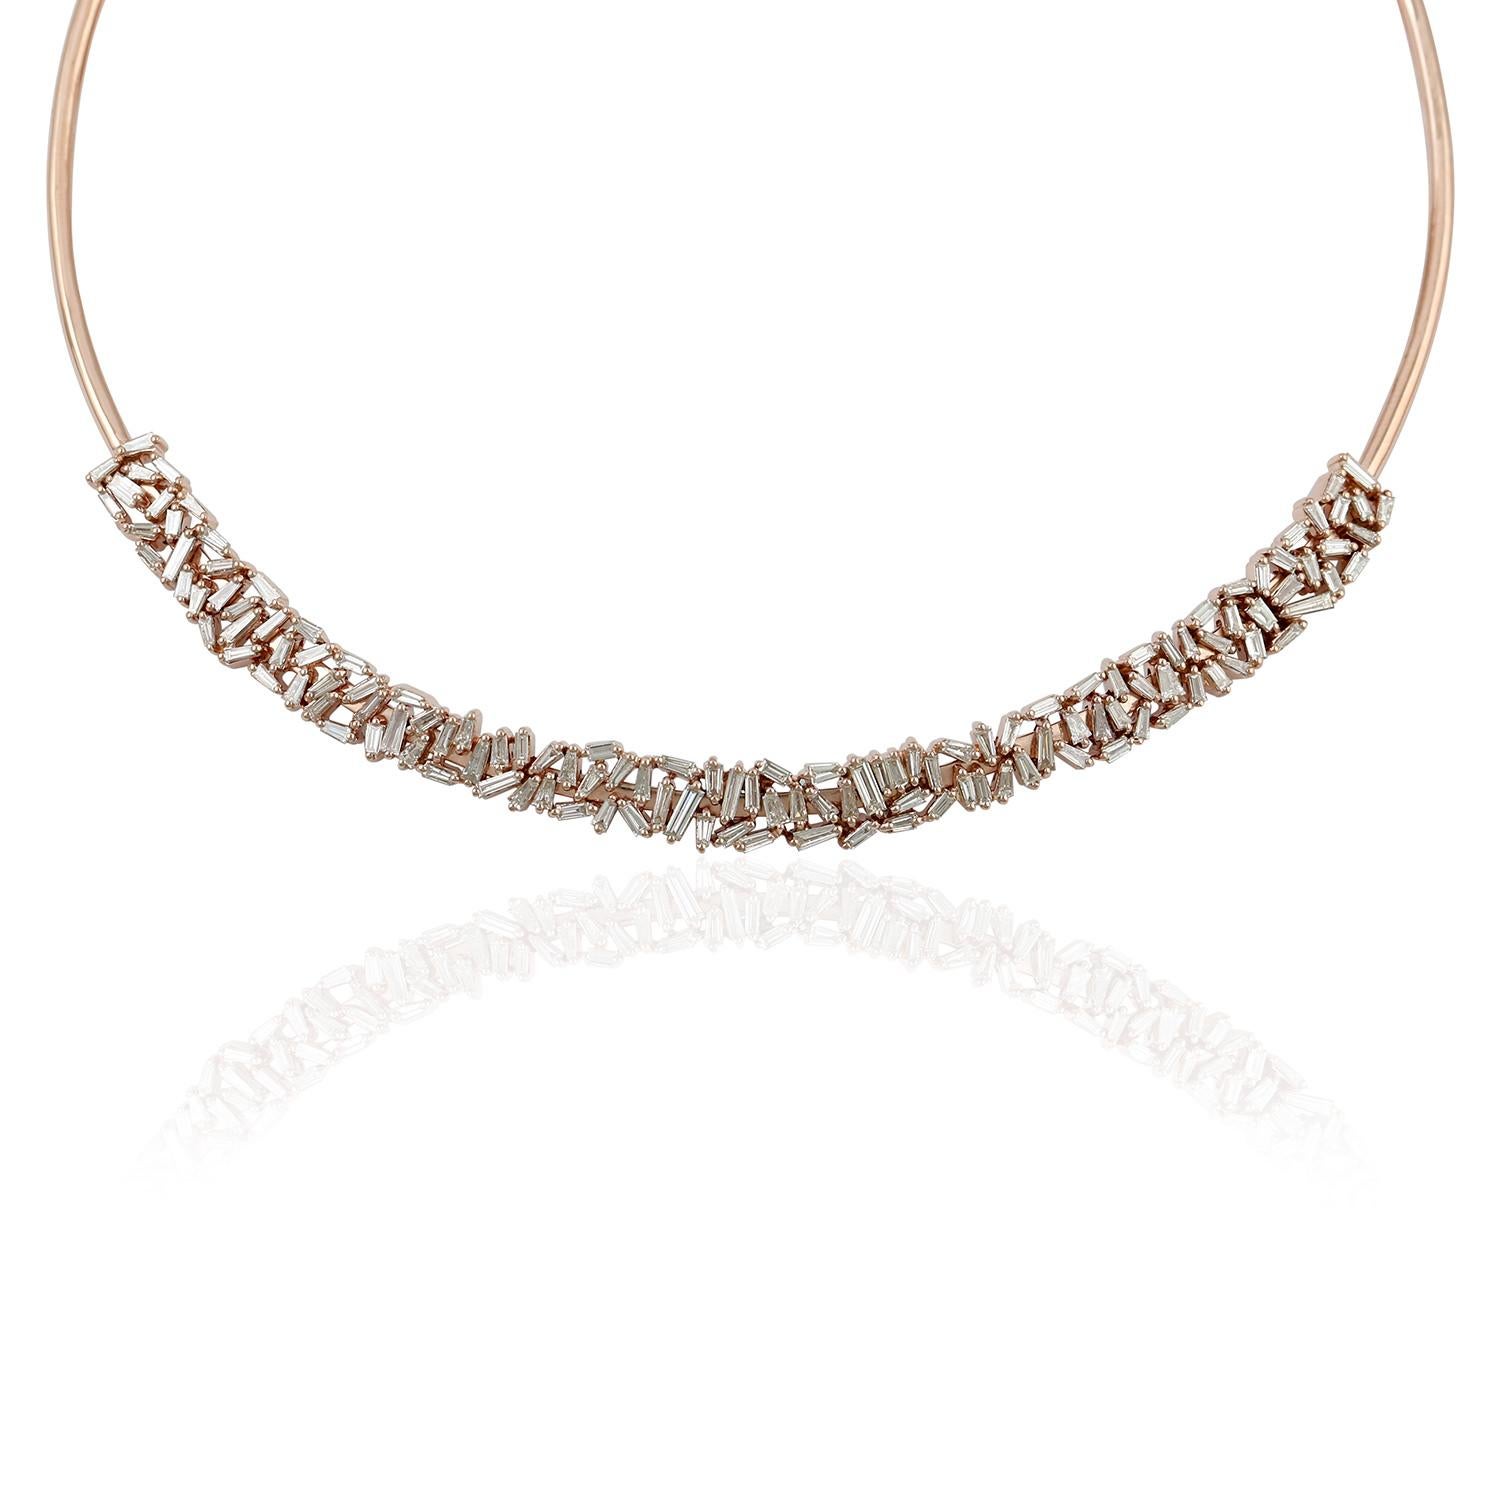 Cast in 18 karat gold, this stunning choker necklace is hand set in 5.15 carats baguette cut diamonds. Also available in yellow and white gold.

FOLLOW  MEGHNA JEWELS storefront to view the latest collection & exclusive pieces.  Meghna Jewels is